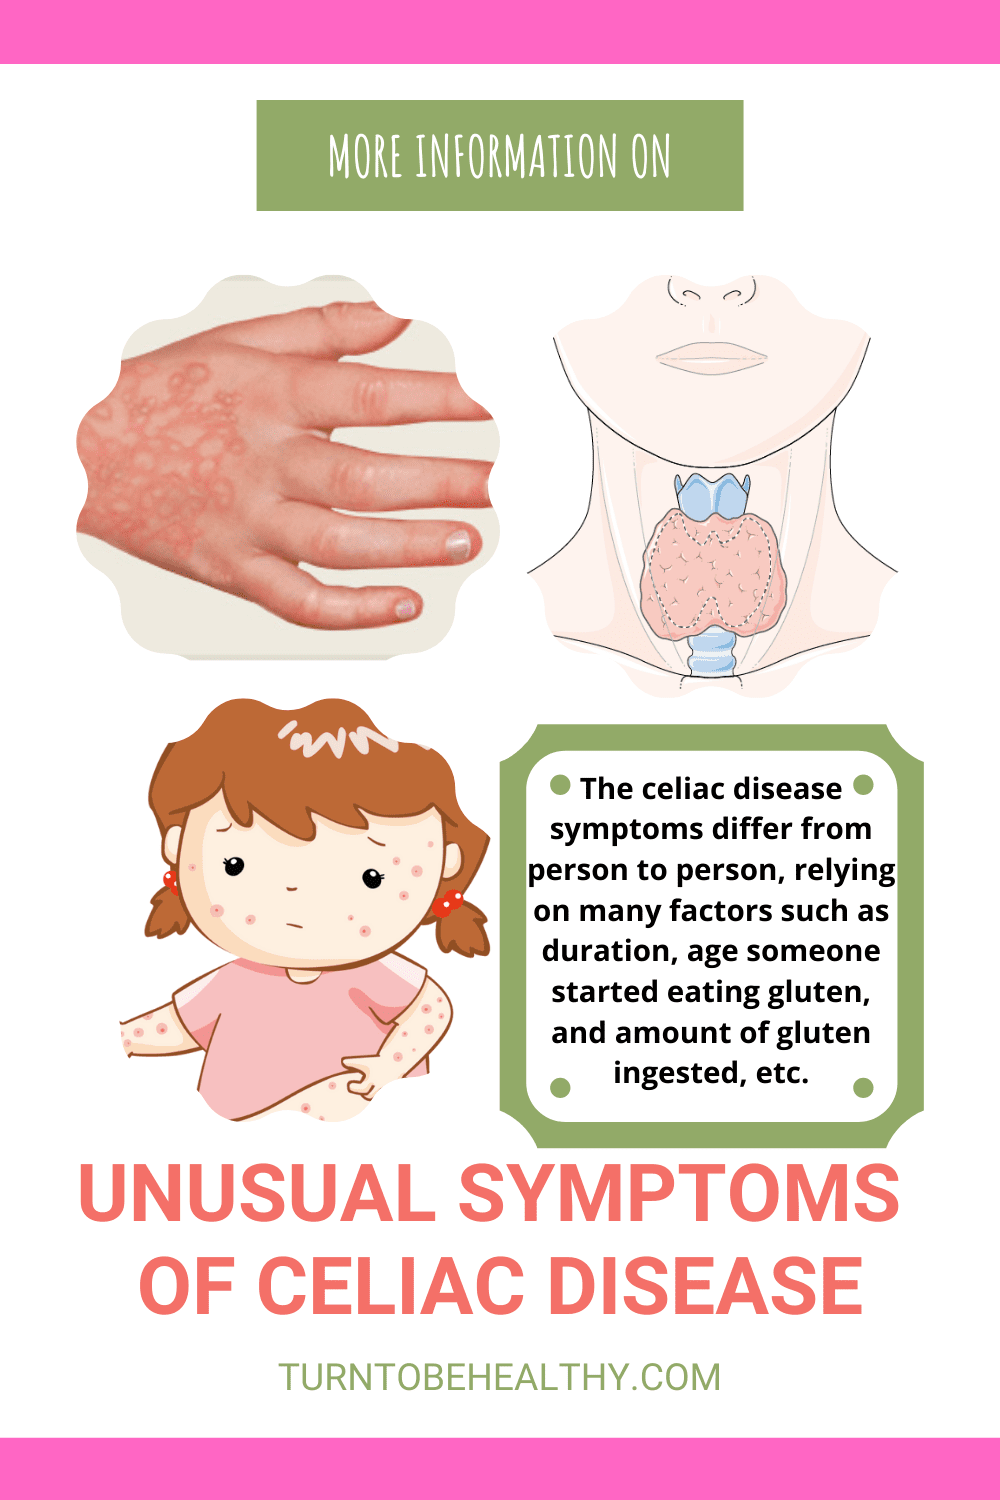 Complications of Celiac Disease - Causes, Interesting Facts, Skin and weird Symptoms of Celiac Disease. Untreated celiac disease can cause many different symptoms and complications. We will look more in-depth at the complications of celiac disease, its symptoms, its causes, and interesting facts about it. We will give you also interesting facts about celiac disease.